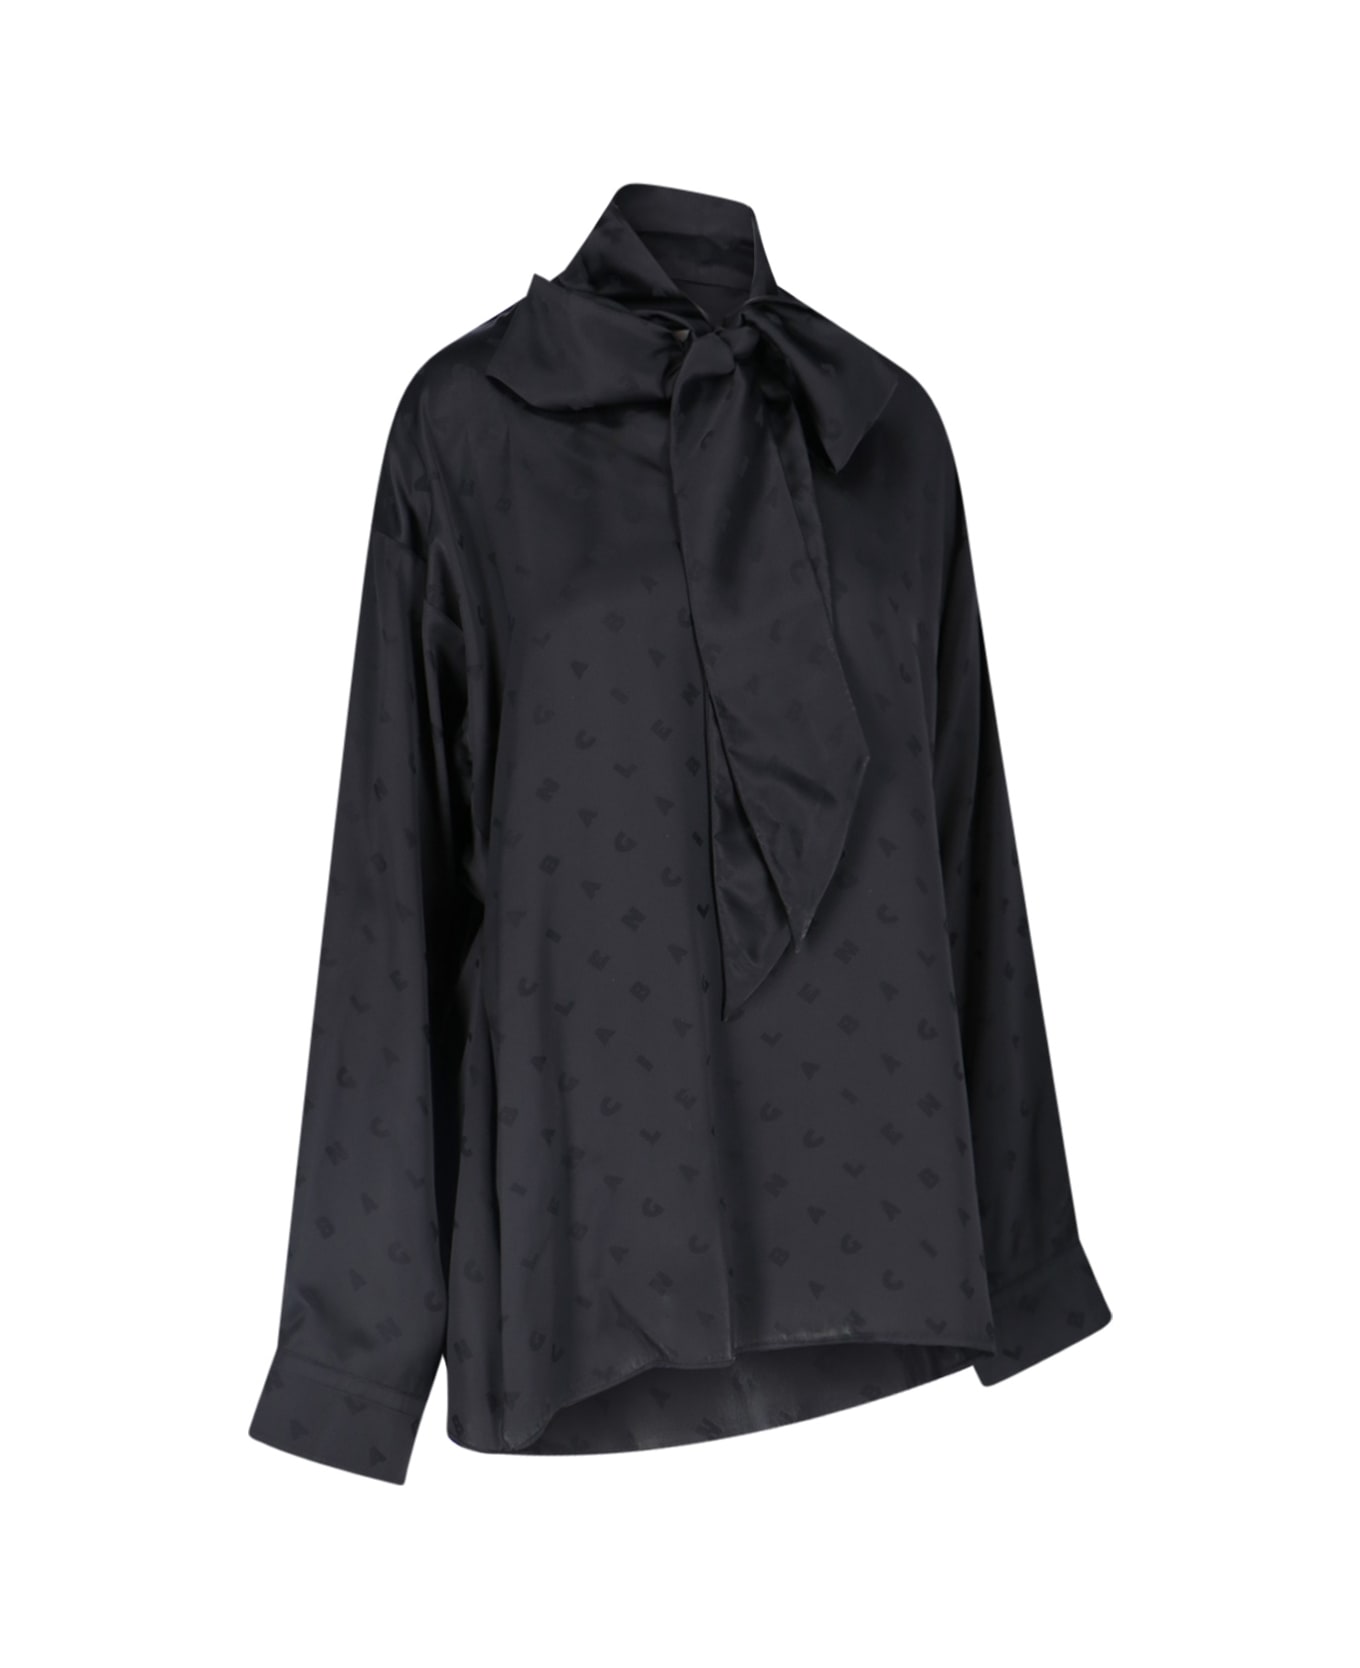 Balenciaga Oversize Hourglass Blouse With Long Panels On Collar - Black ブラウス